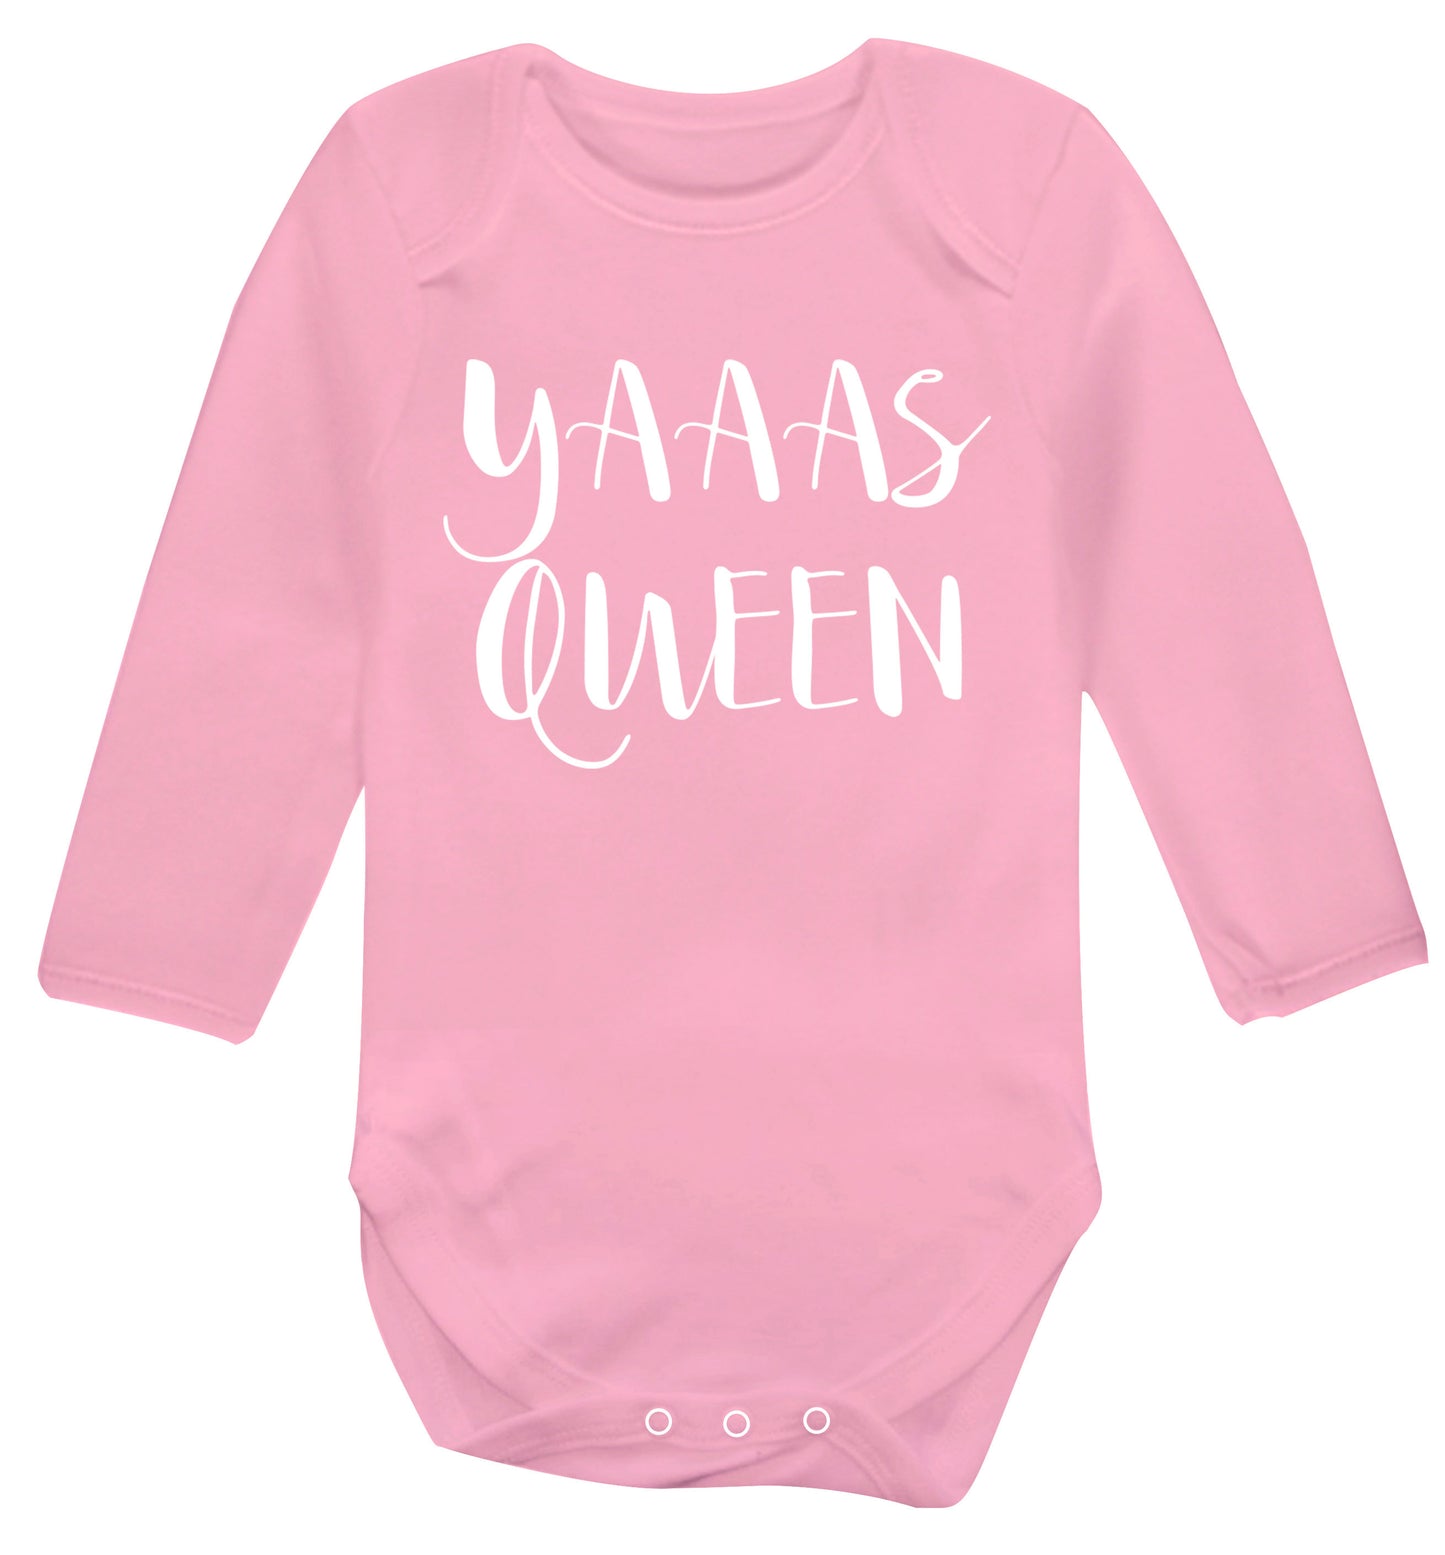 Yas Queen Baby Vest long sleeved pale pink 6-12 months